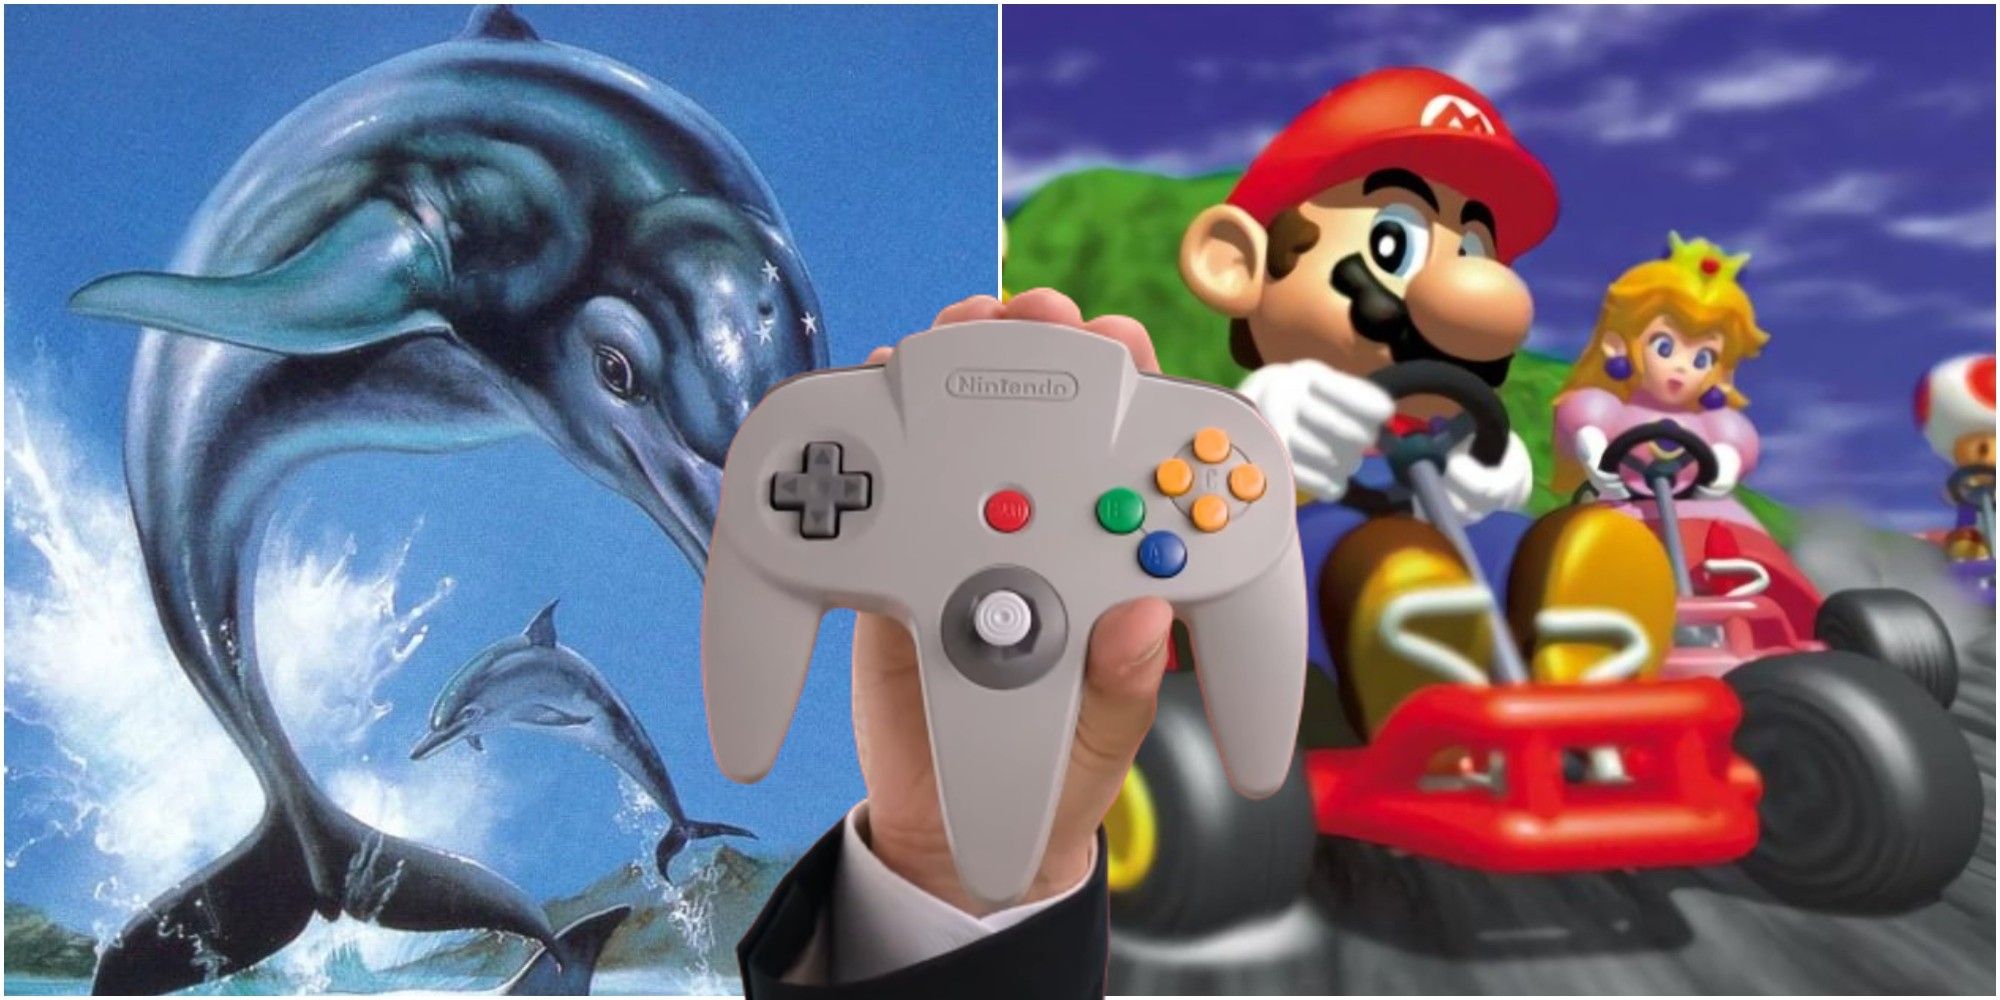 When Will The Nintendo 64 And Sega Genesis Games Go Live On Switch